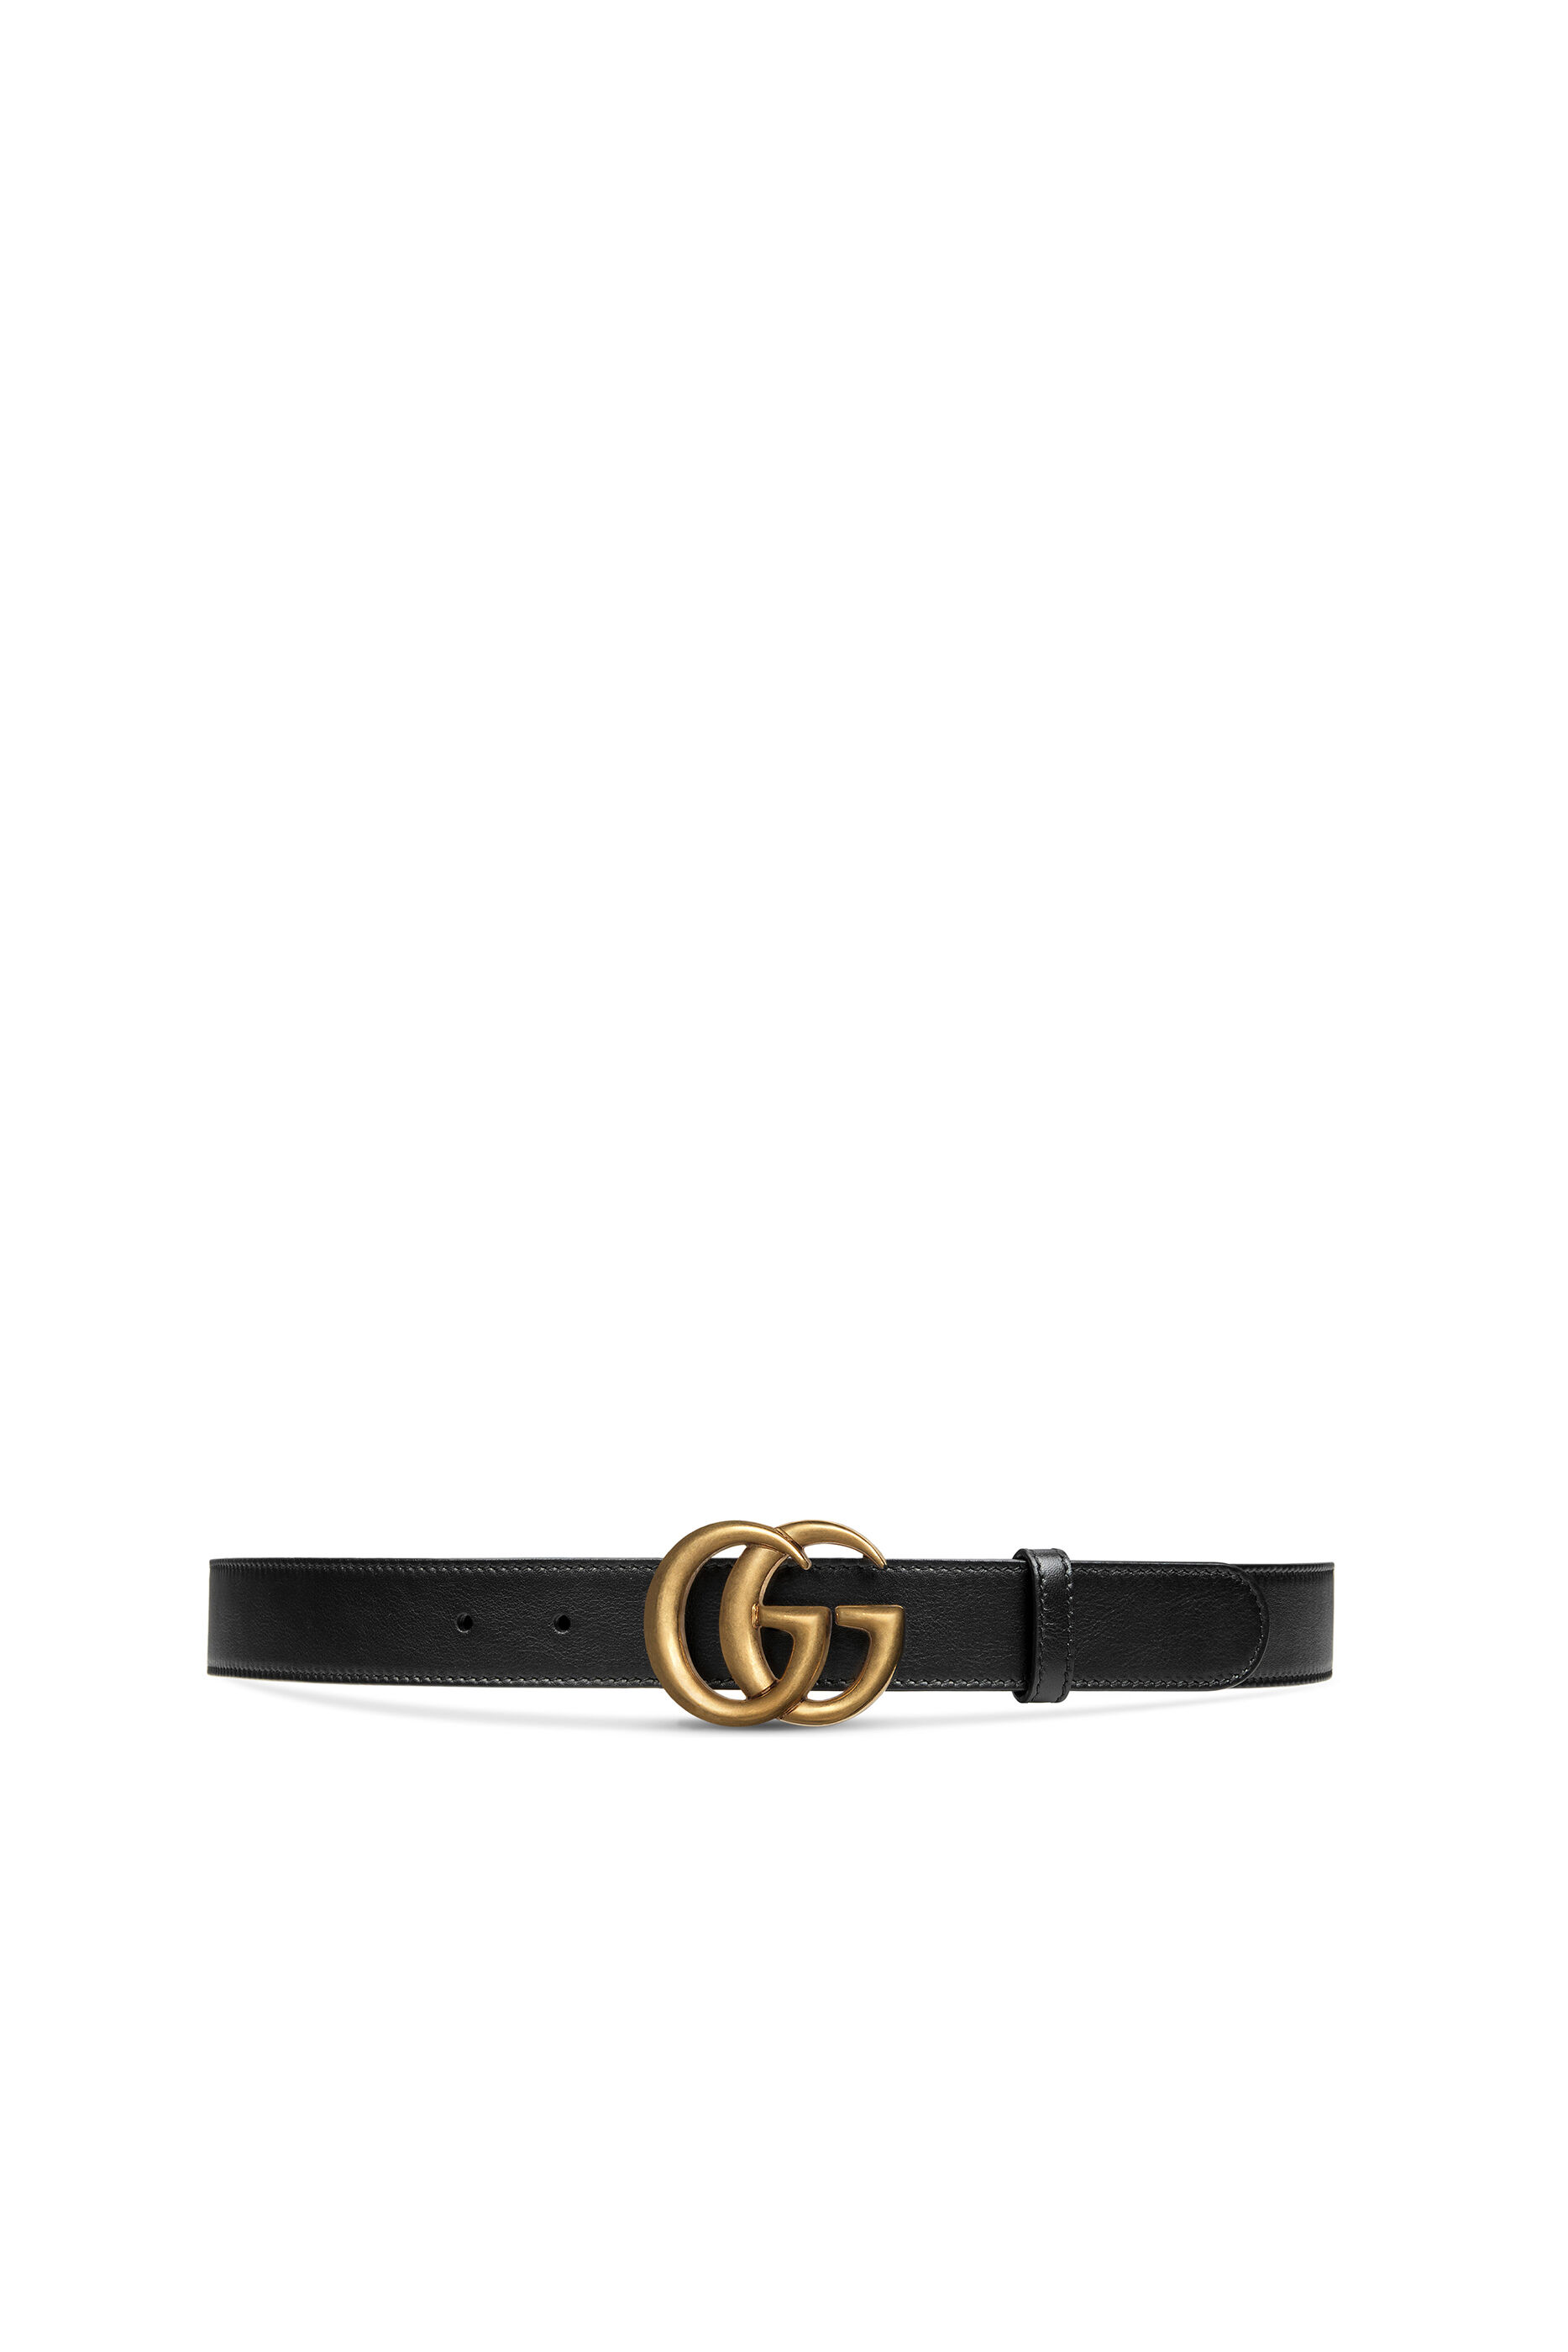 how much cost gucci belt